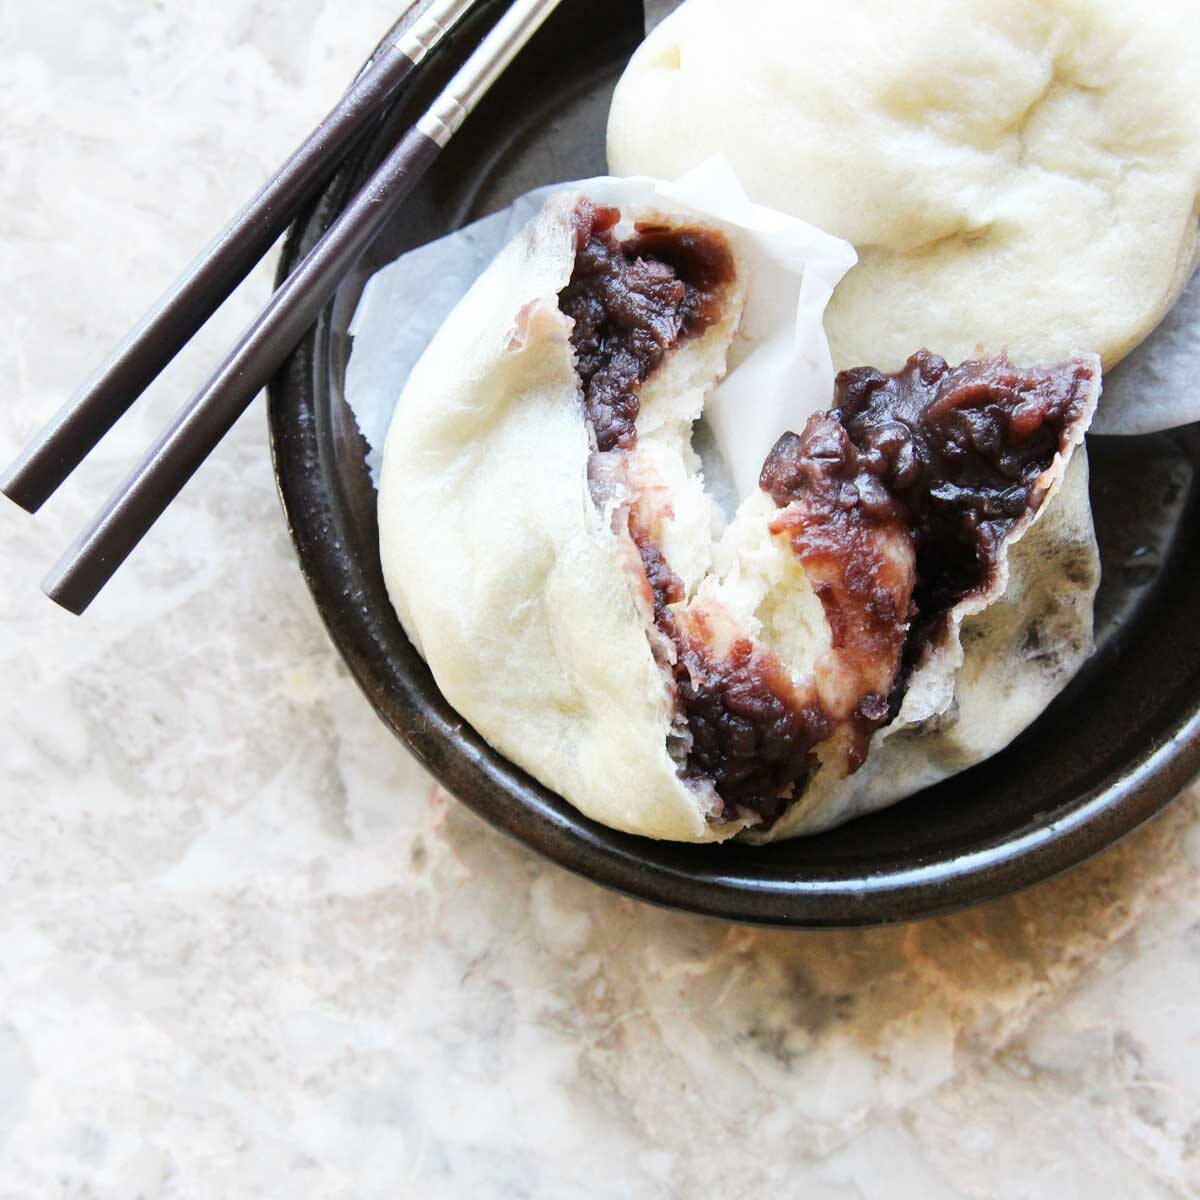 List of 10+ Steamed Buns, Baozi & Mantou Flavors with Recipes - Steamed Buns